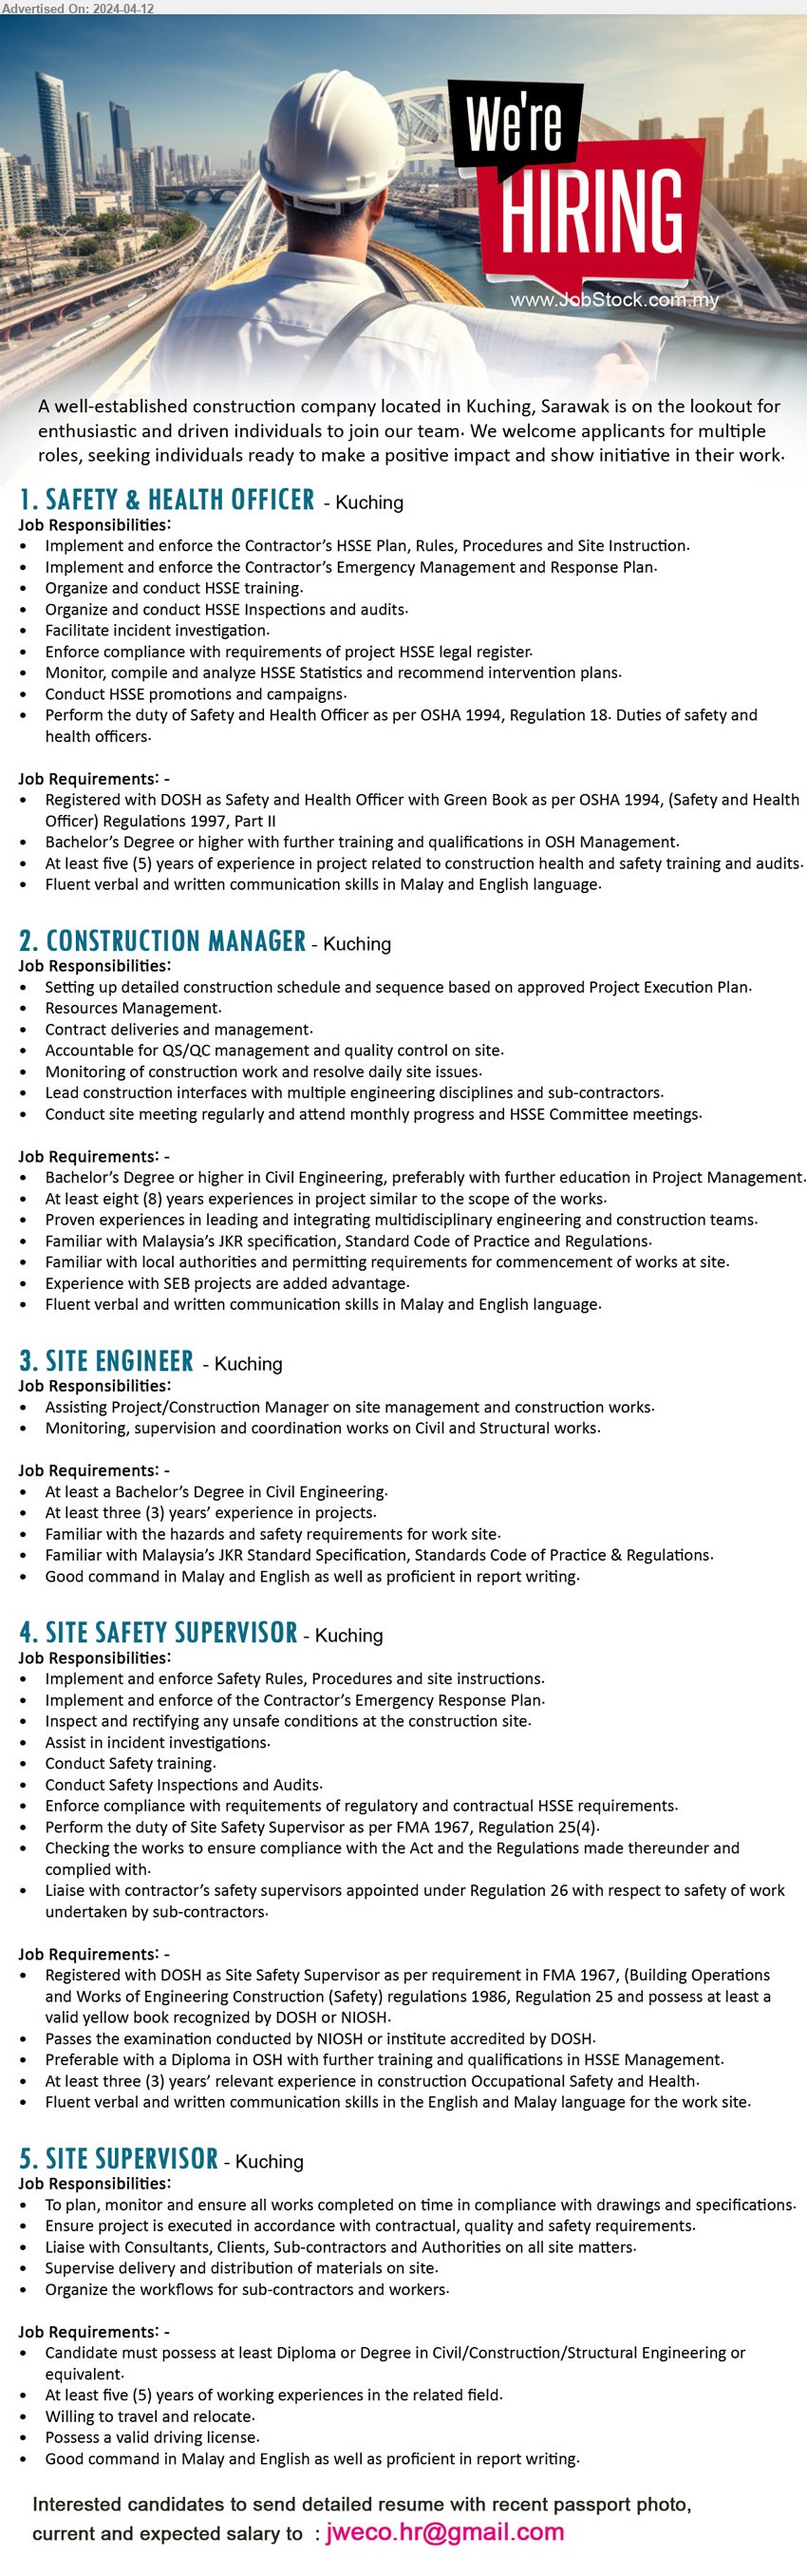 ADVERTISER (Construction Company) - 1. SAFETY & HEALTH OFFICER (Kuching), Registered with DOSH as Safety and Health Officer with Green Book as per OSHA 1994, (Safety and Health Officer) Regulations 1997, Part II,...
2. CONSTRUCTION MANAGER (Kuching), Bachelor’s Degree or higher in Civil Engineering, preferably with further education in Project Management.,...
3. SITE ENGINEER (Kuching), Bachelor’s Degree in Civil Engineering, 3 yrs. exp.,...
4. SITE SAFETY SUPERVISOR (Kuching), Registered with DOSH as Site Safety Supervisor as per requirement in FMA 1967, (Building Operations and Works of Engineering Construction (Safety) regulations 1986, Regulation 25 ,...
5. SITE SUPERVISOR (Kuching),  Diploma or Degree in Civil/Construction/Structural Engineering, 5 yrs. exp.,...
Email resume to ...
